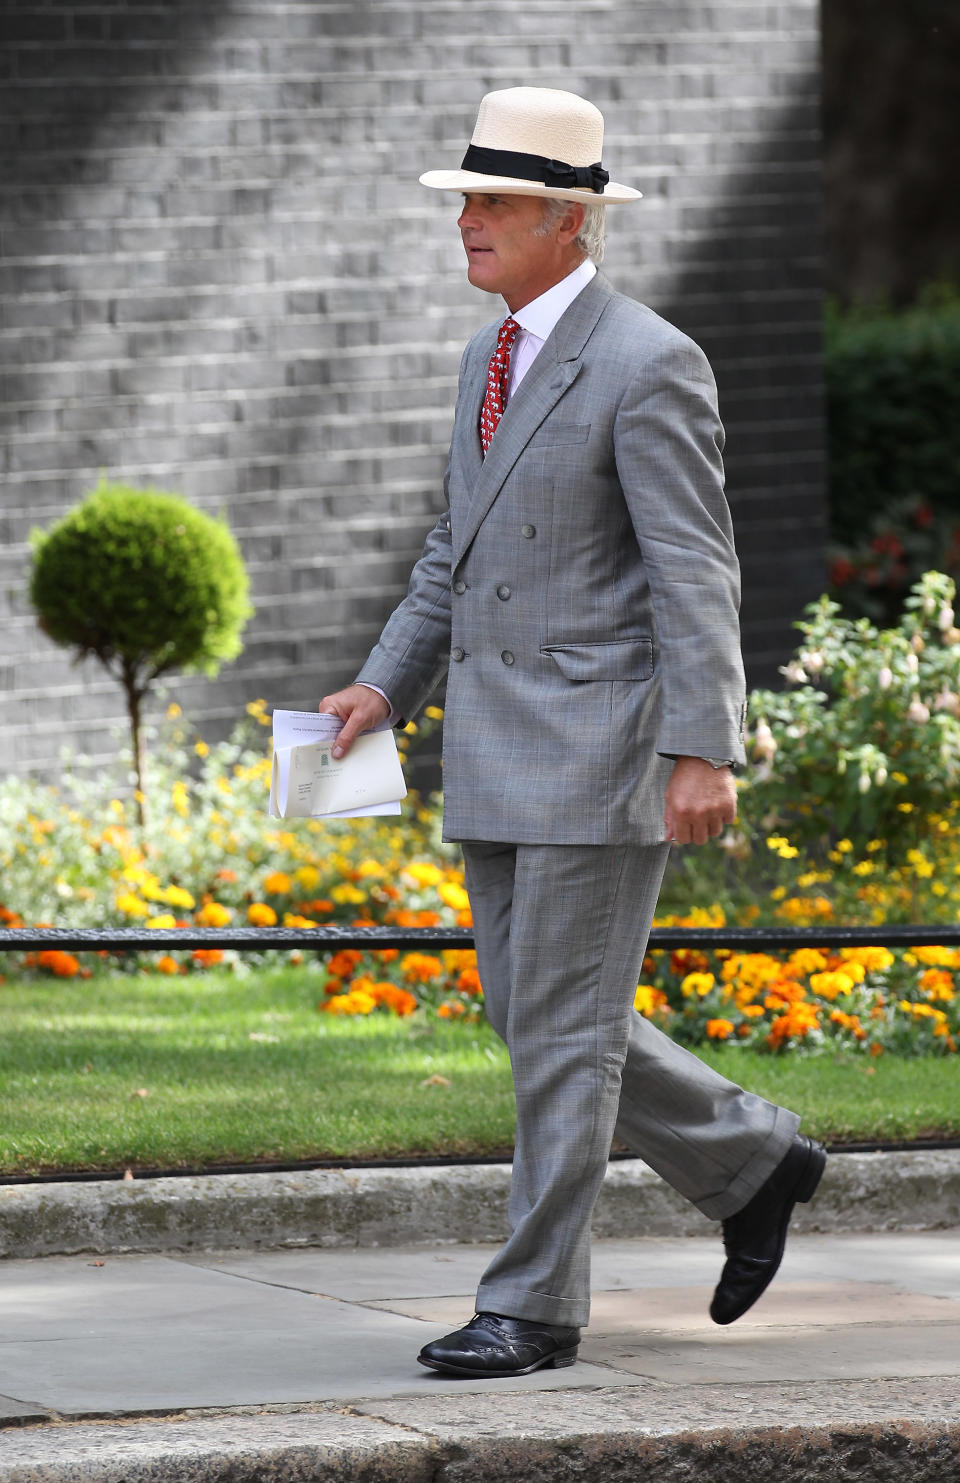 LONDON, ENGLAND - JULY 06: Desmond Swayne Parliamentary Secretary to Prime Minister David Cameron arrives in Downing Street on July 6, 2010 in London, England. Later Prime Minister David Cameron will chair a meeting of the National Security Council. (Photo by Peter Macdiarmid/Getty Images)